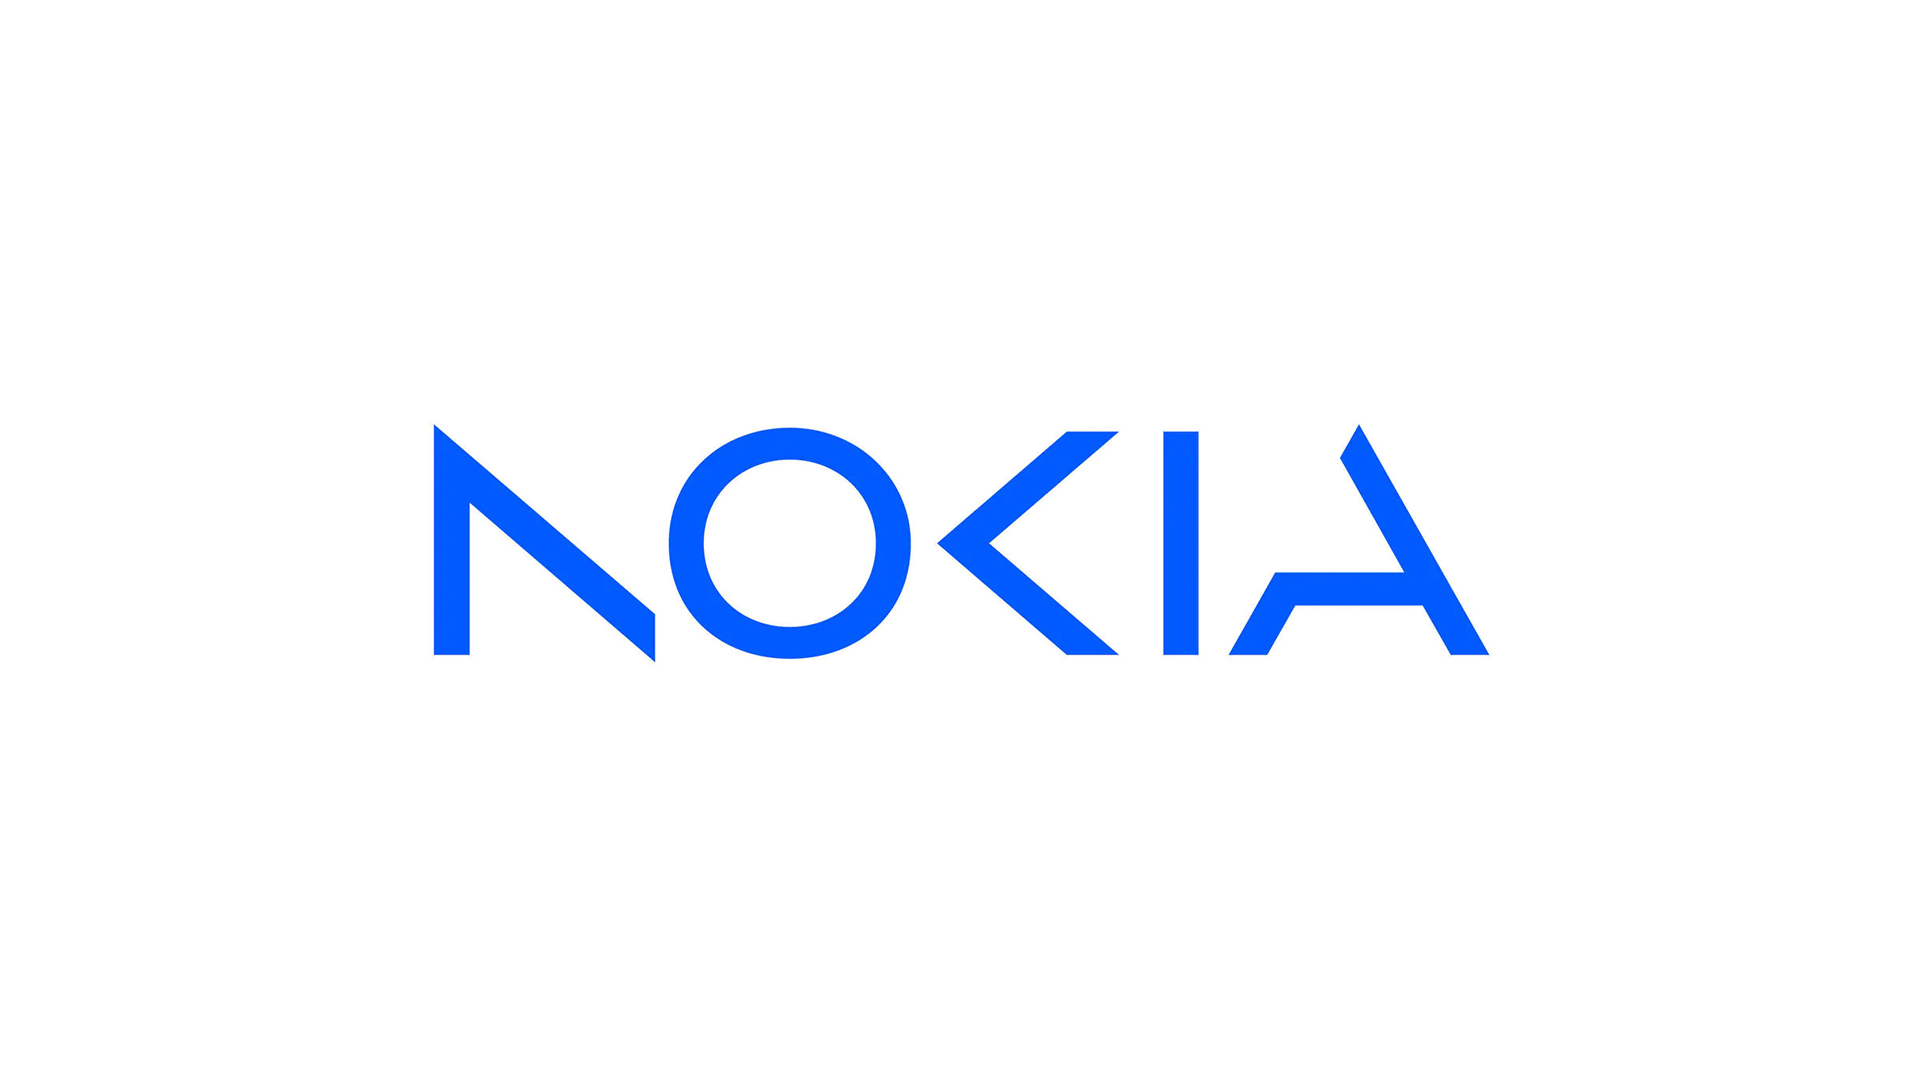 New Nokia logo reminds people of another controversial rebrand ...